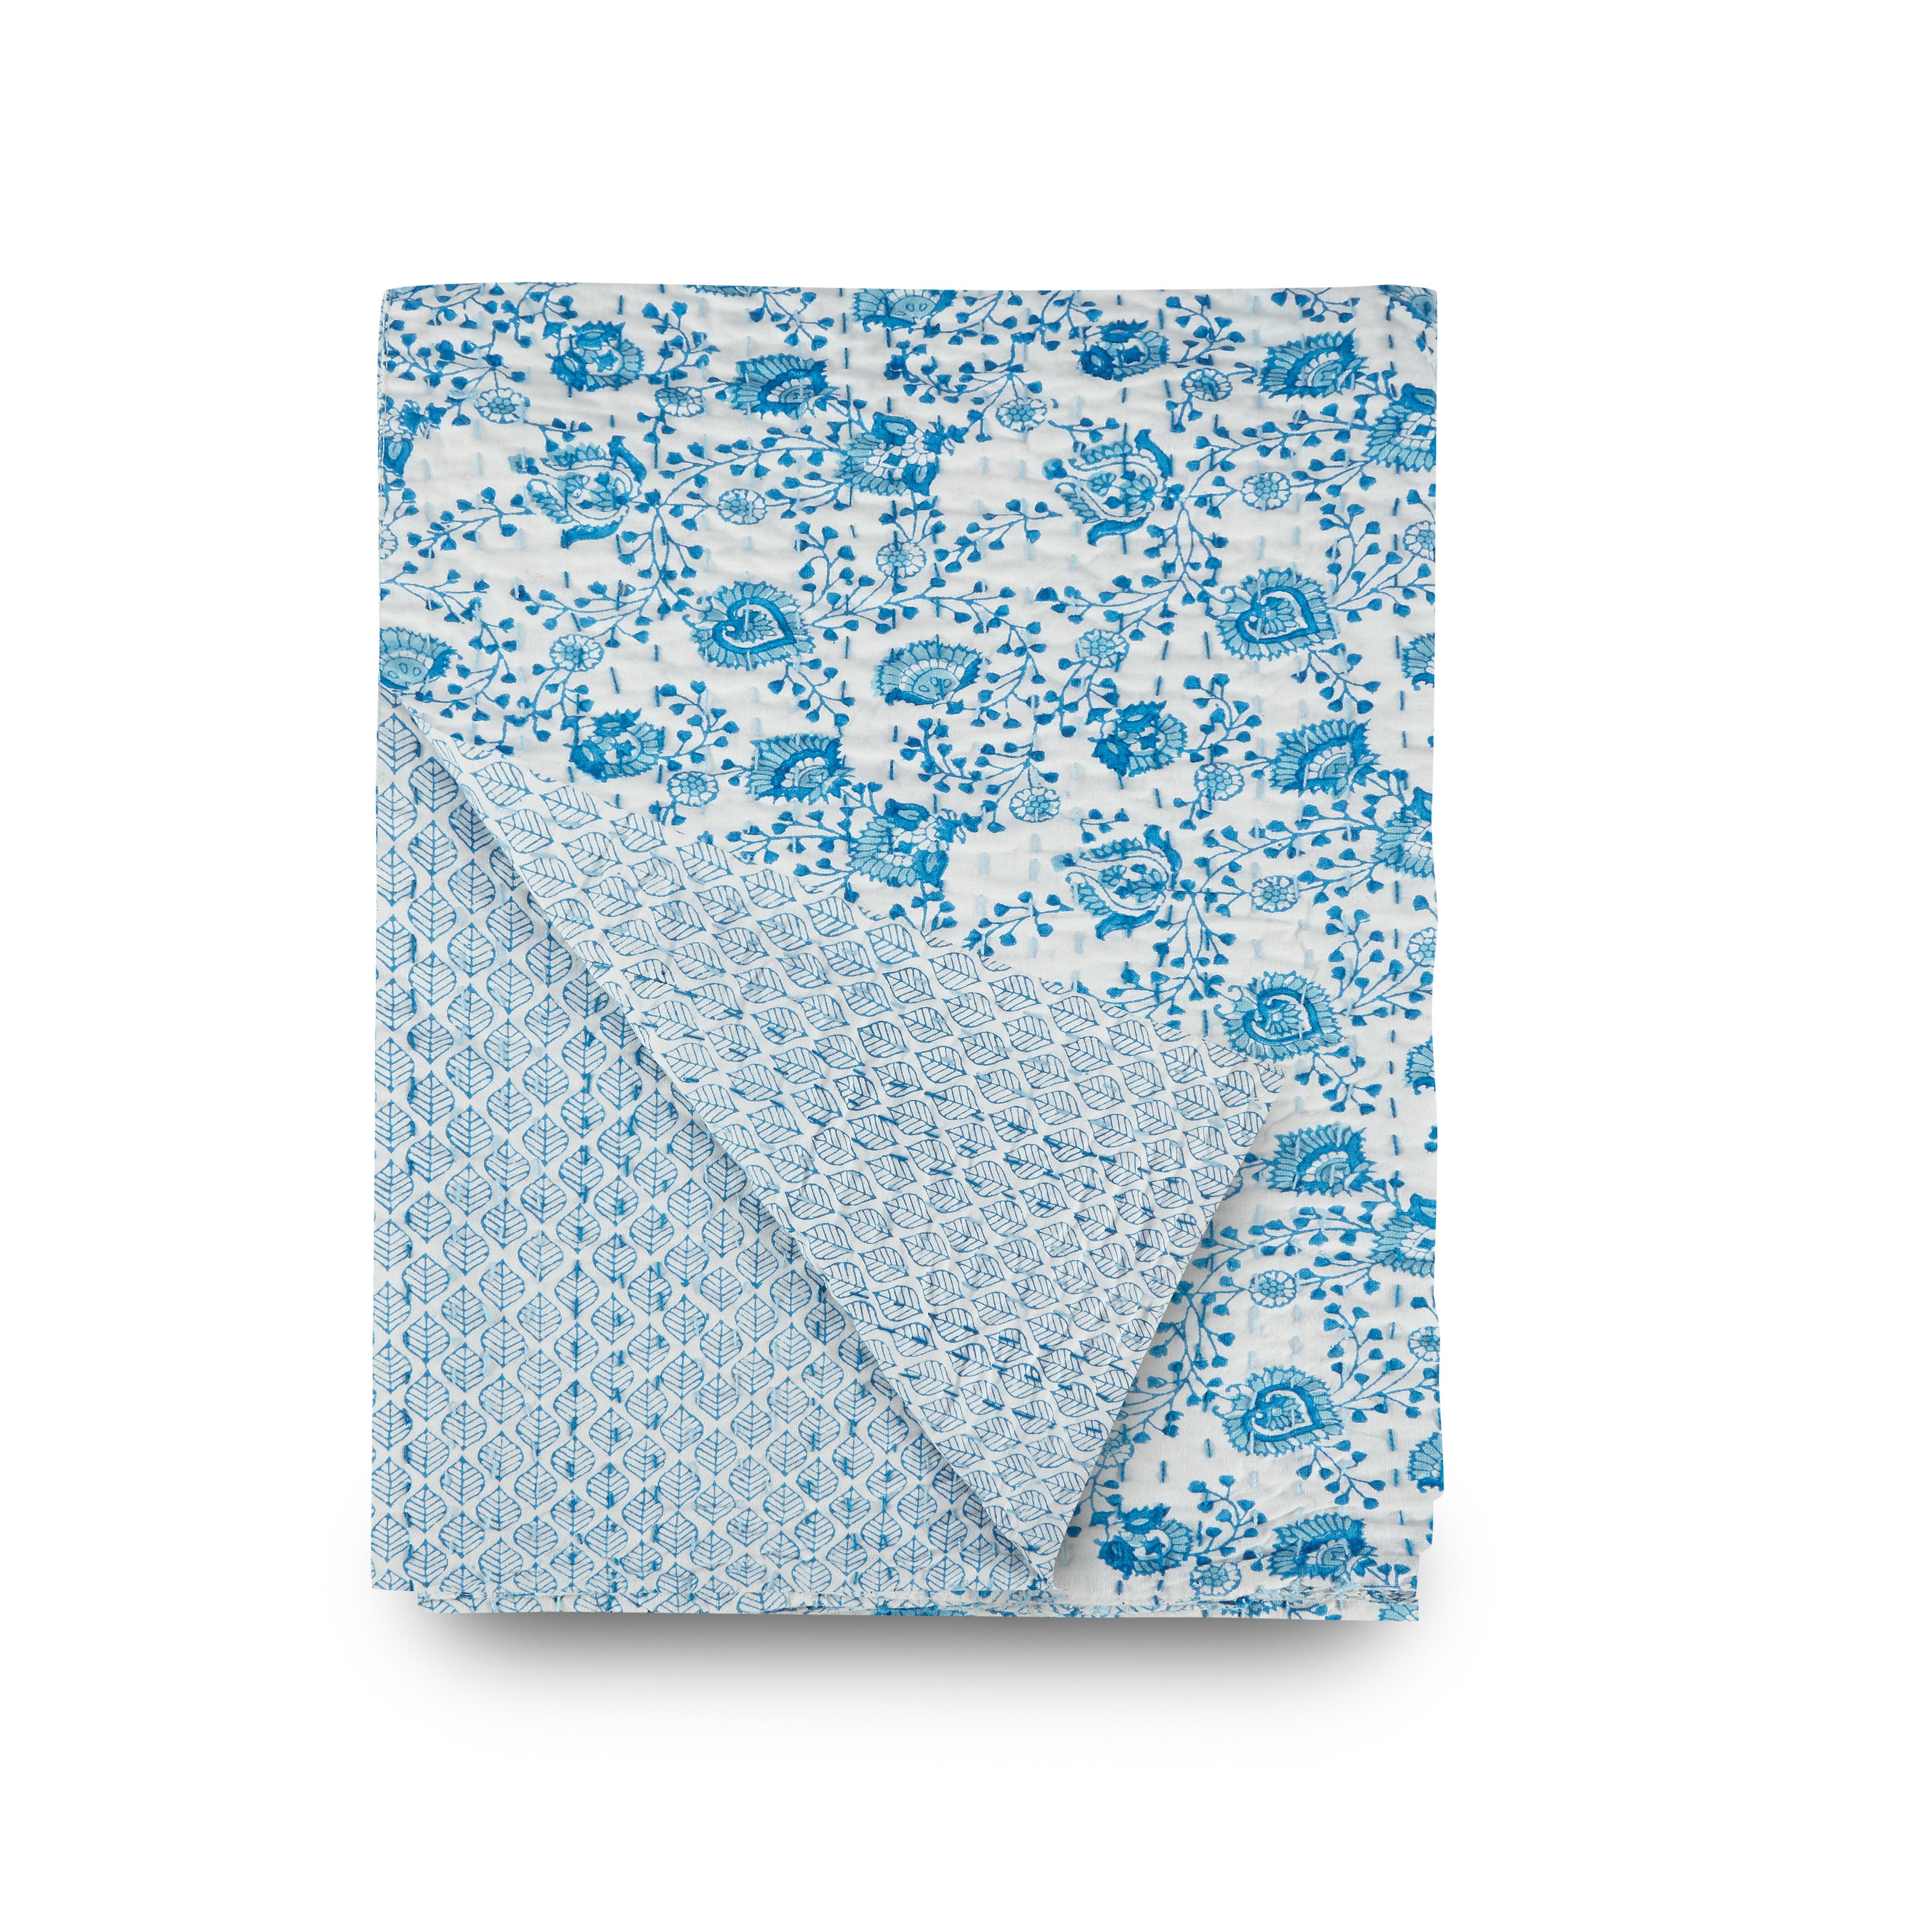 A soft, hand blocked reversible throw in blue and white, with coordinating blue stitching. Reversible; one side with a geometric leaf repeat, the other with an exuberant, crisp floral. Available in three sizes: throw, Queen, King. Please carefully